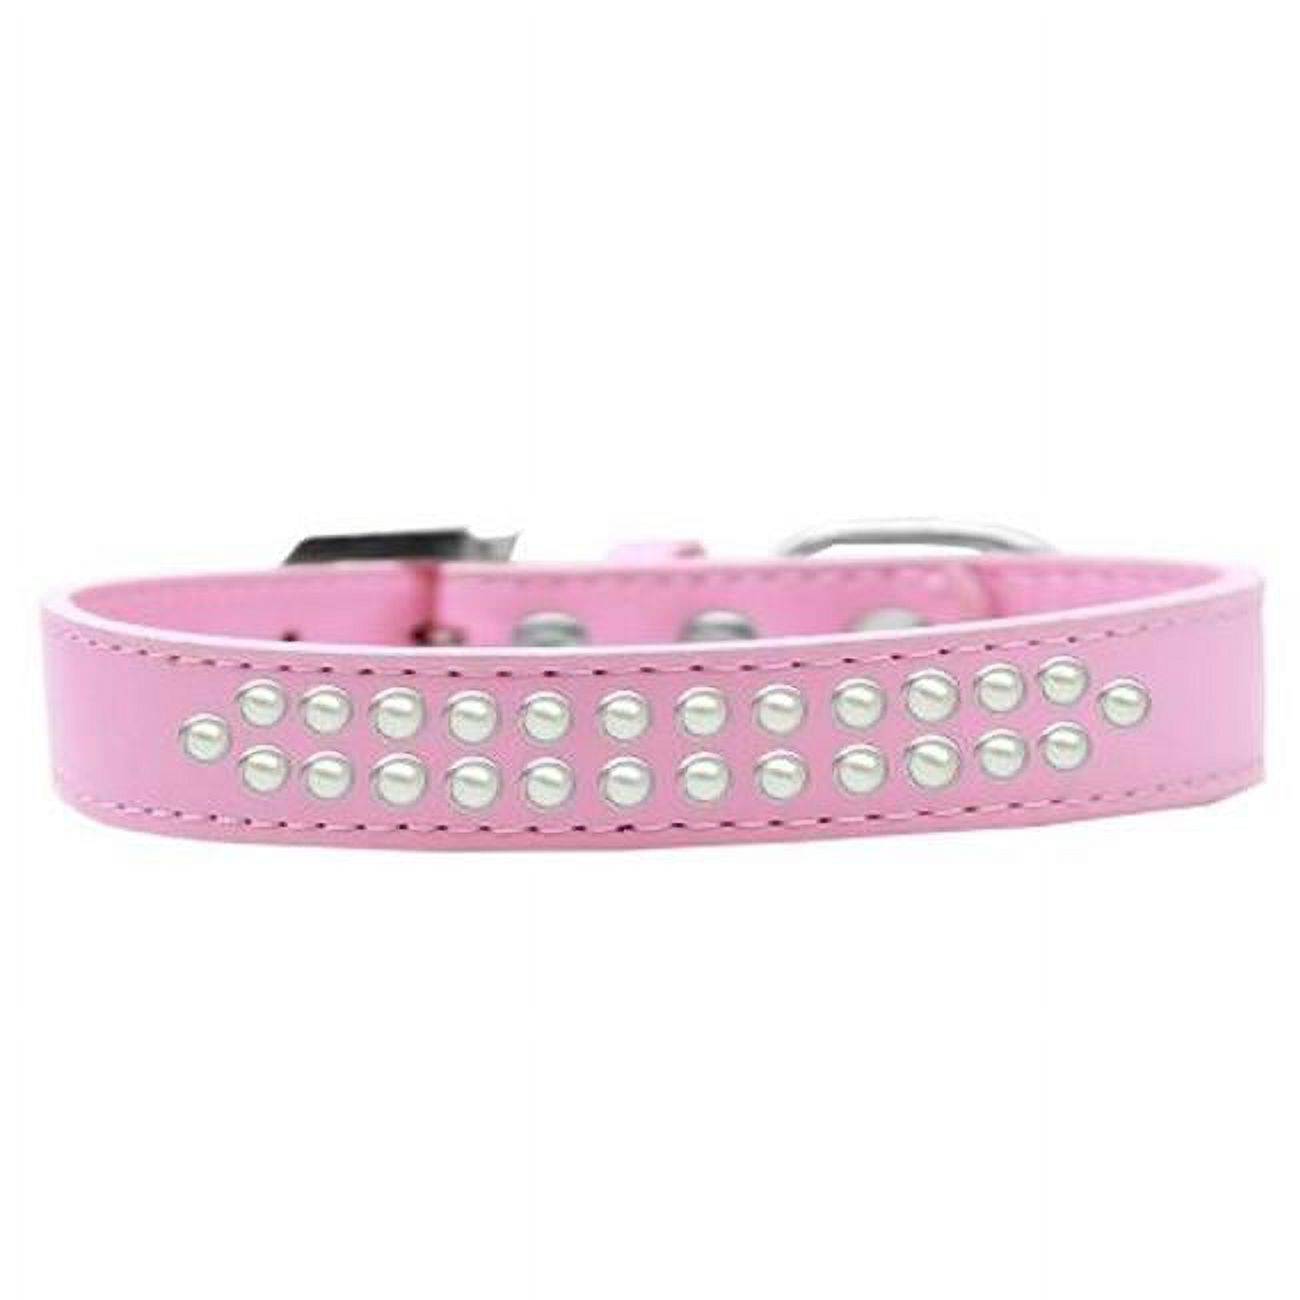 Mirage Pet Products613-03 LPK-14 Two Row Pearl Dog Collar, Light Pink - Size 14 - image 1 of 9